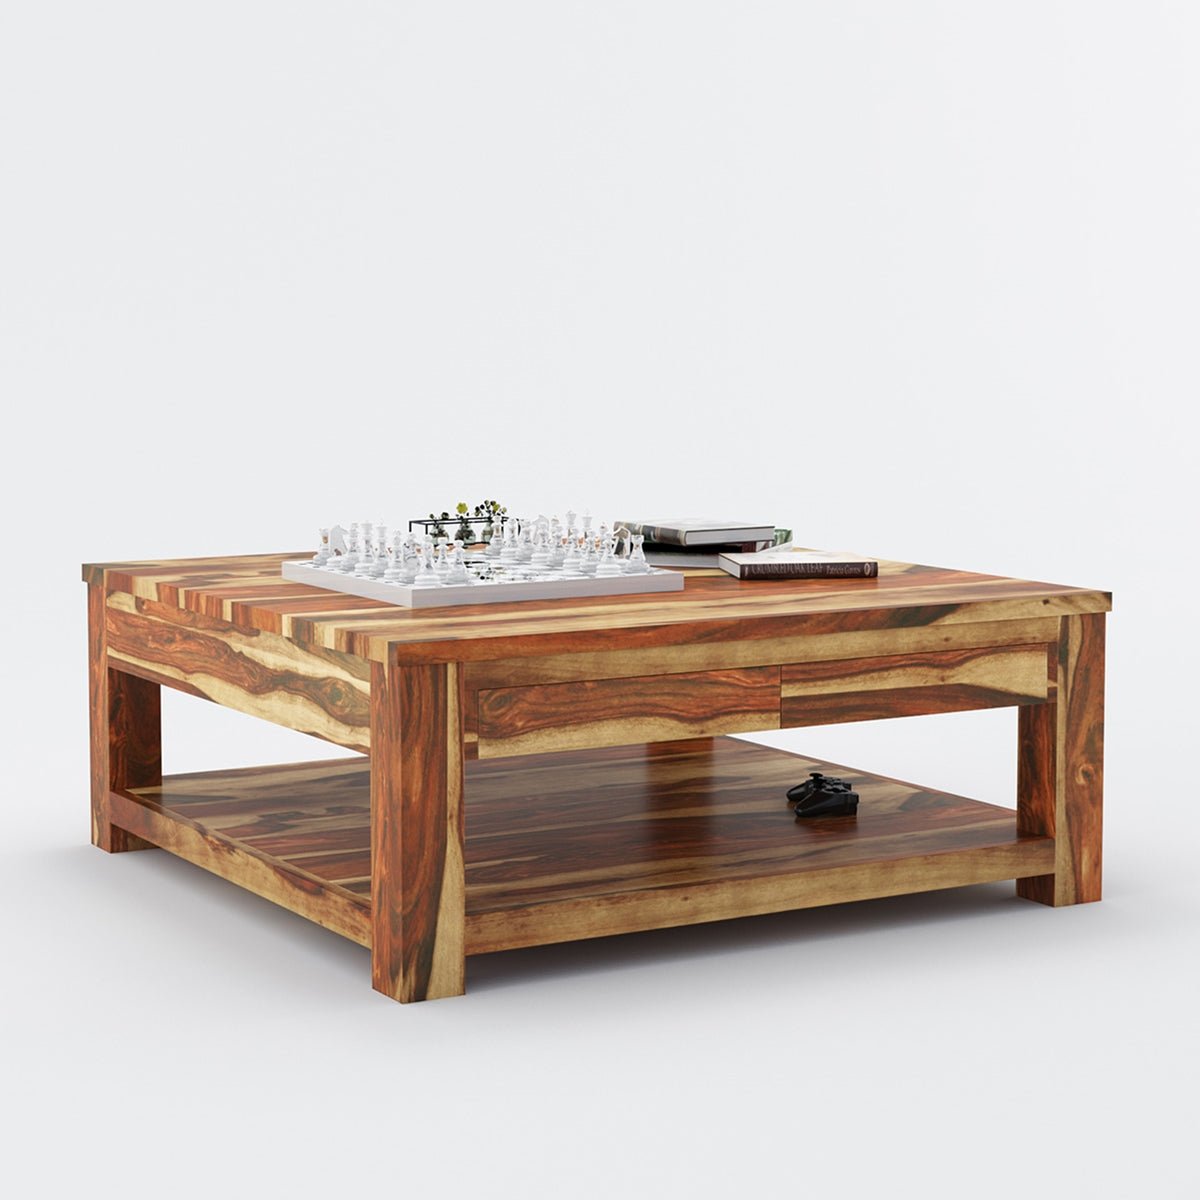 Dresden Solid Wood Contemporary Large Square Coffee Table